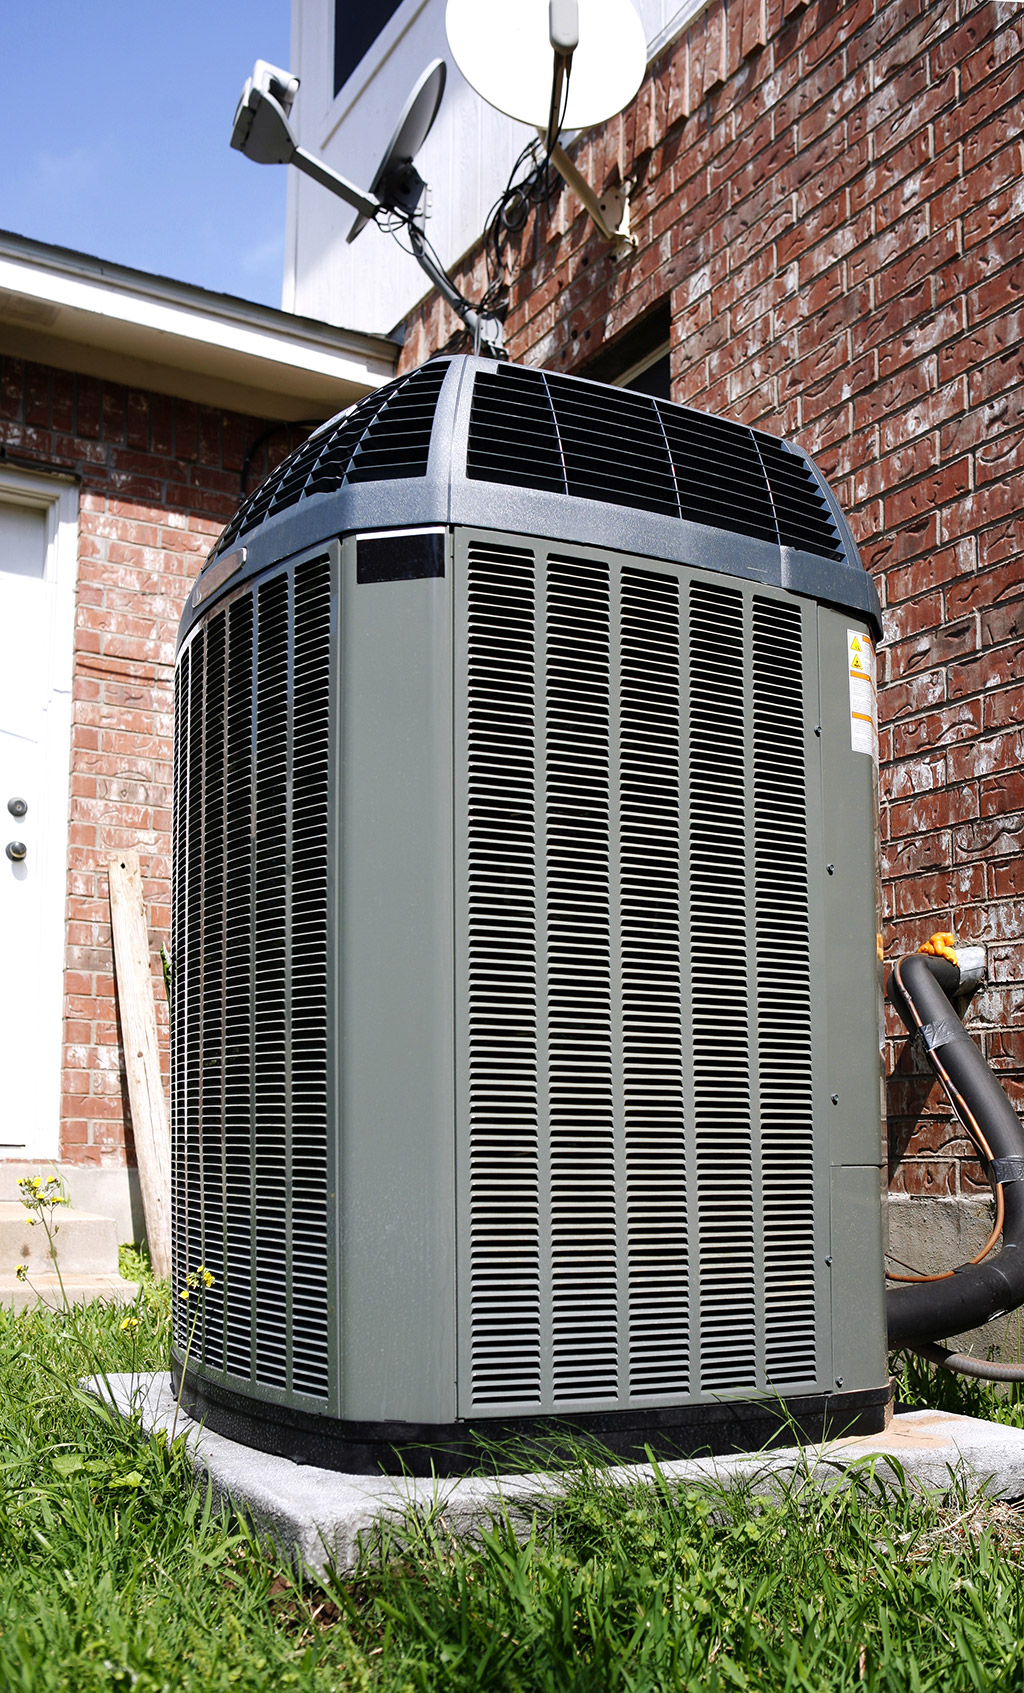 Reasons to Install Central Air Conditioning: Air Conditioning Service in Mesquite, TX